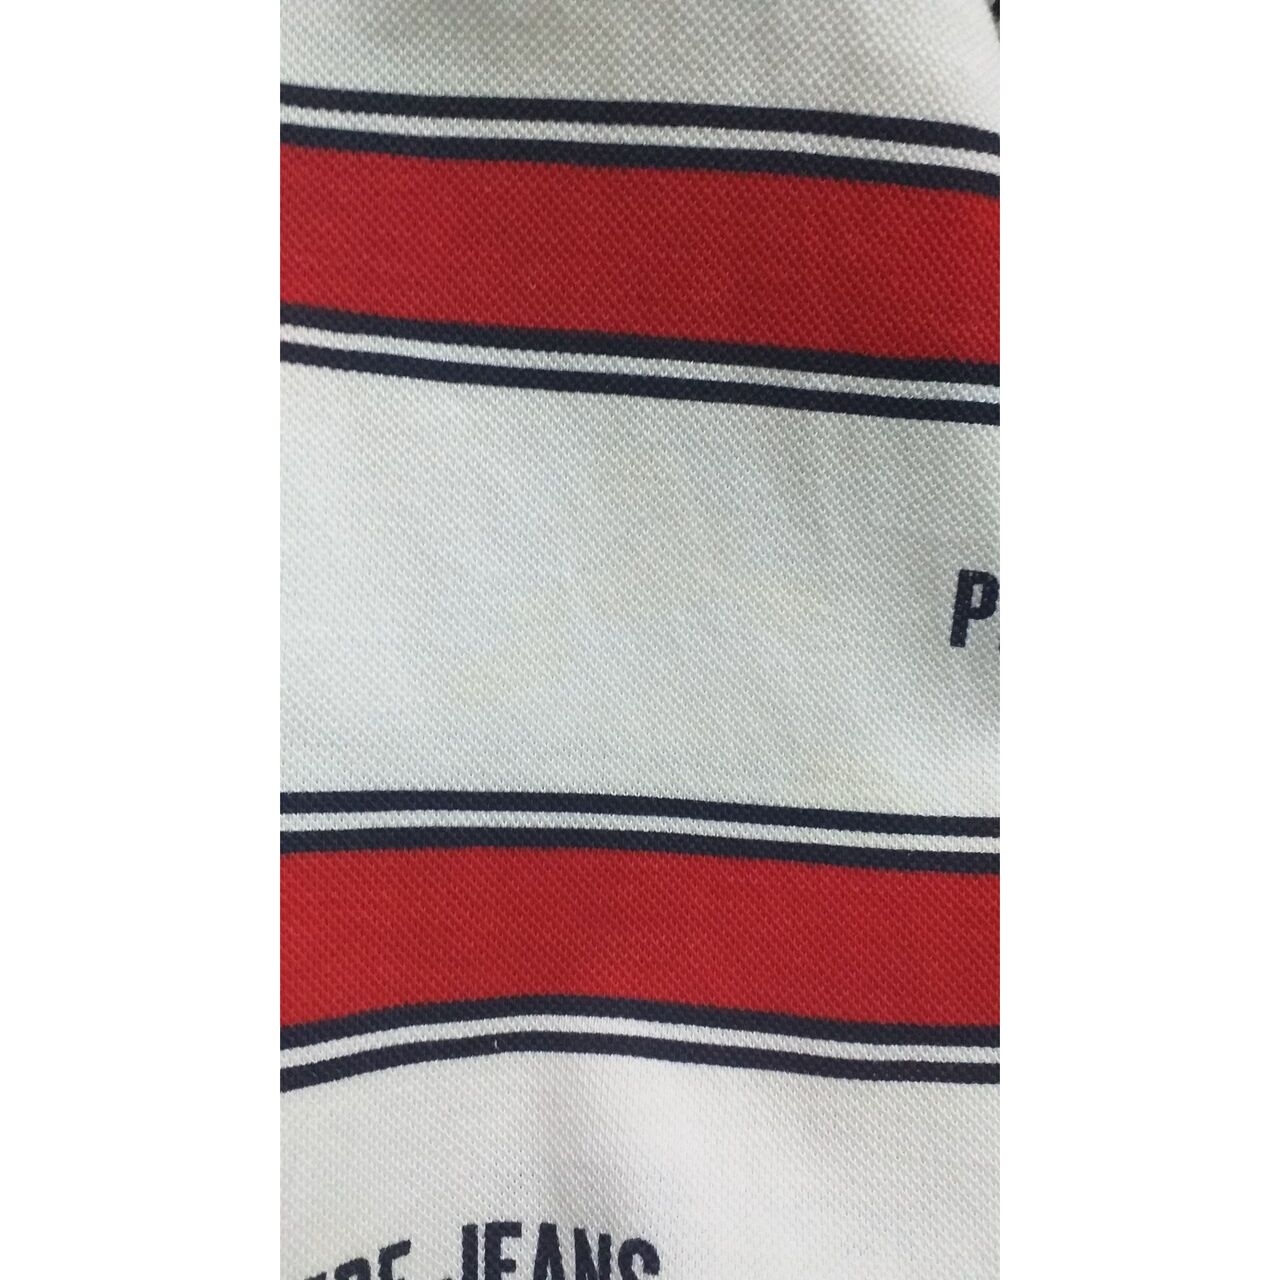 Pepe Jeans Red & White Stripes Polo Shirt